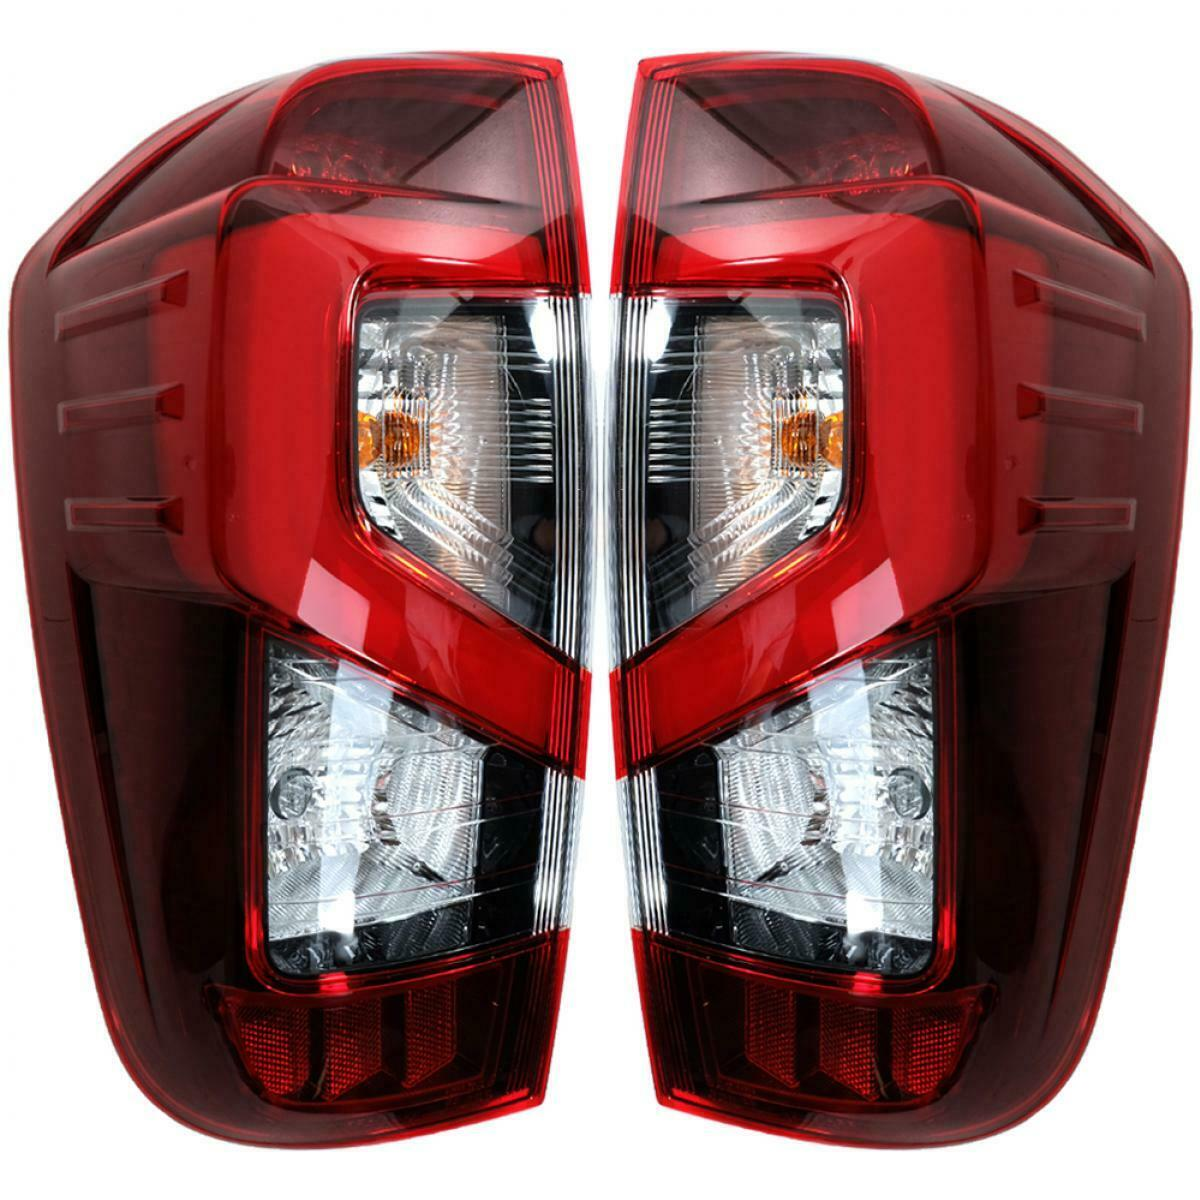 LED TAIL LAMP FOR Np300 16-21